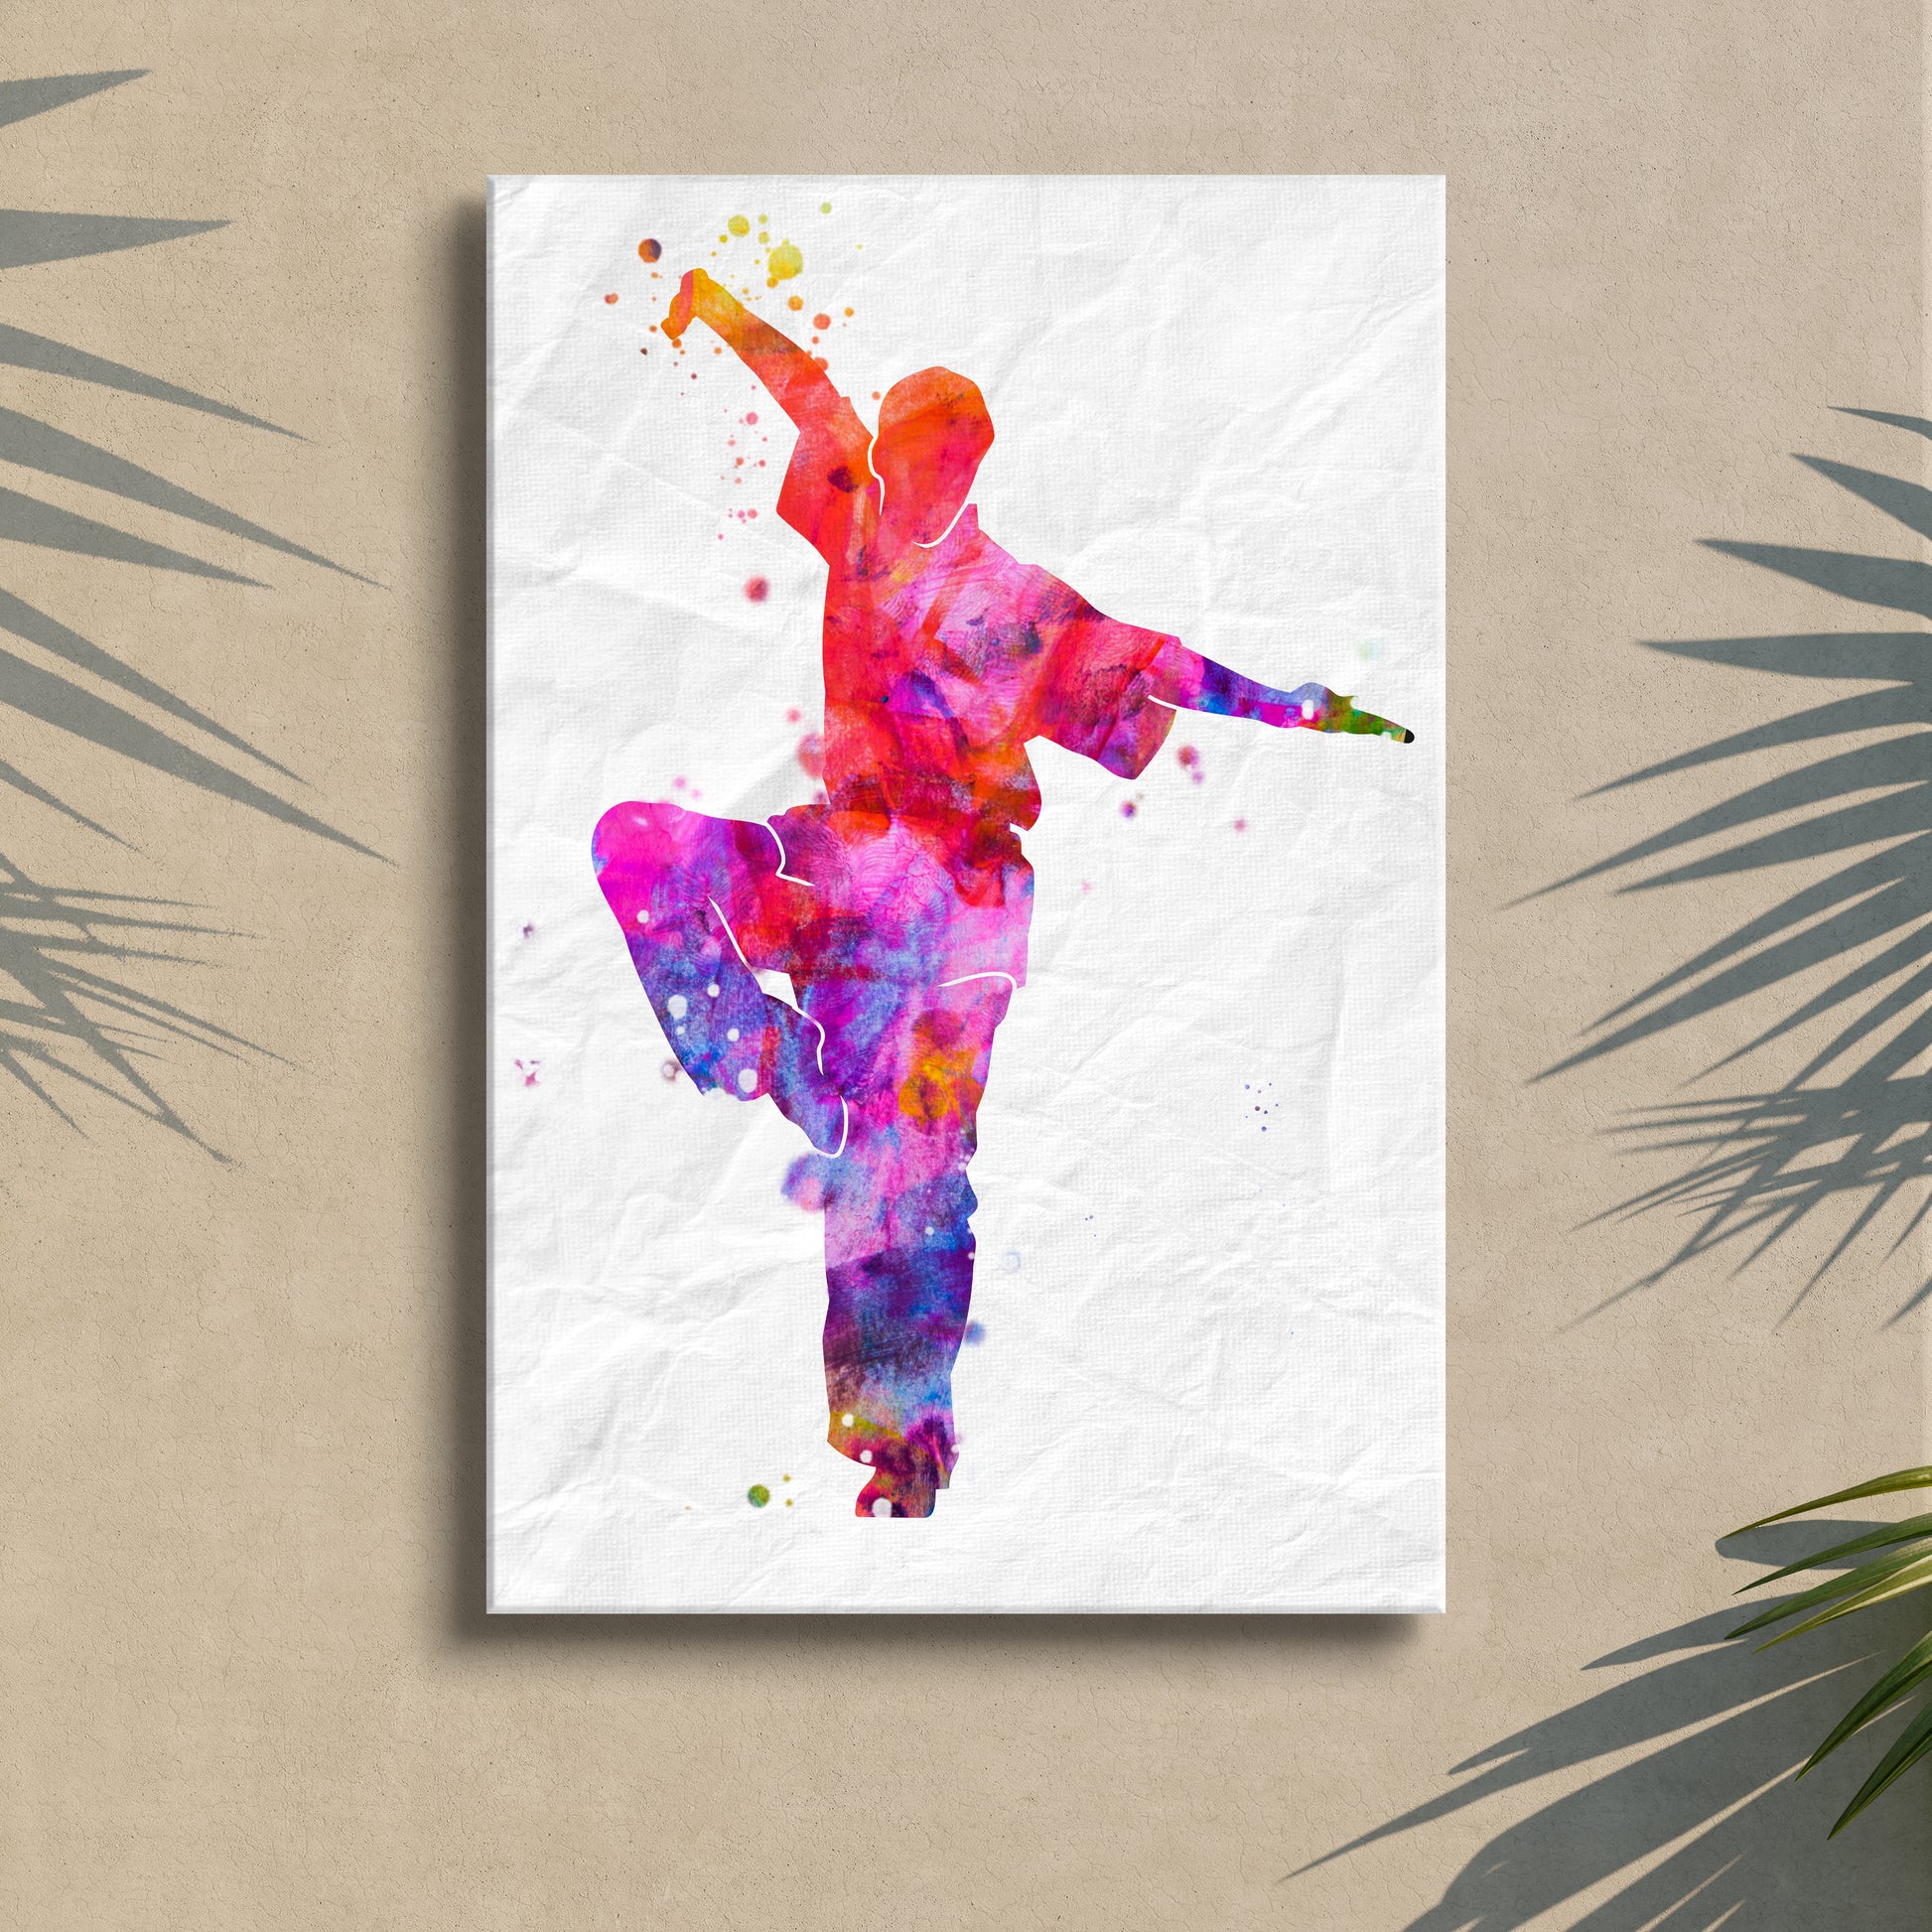 Kung Fu Watercolor Canvas Wall Art - Image by Tailored Canvases